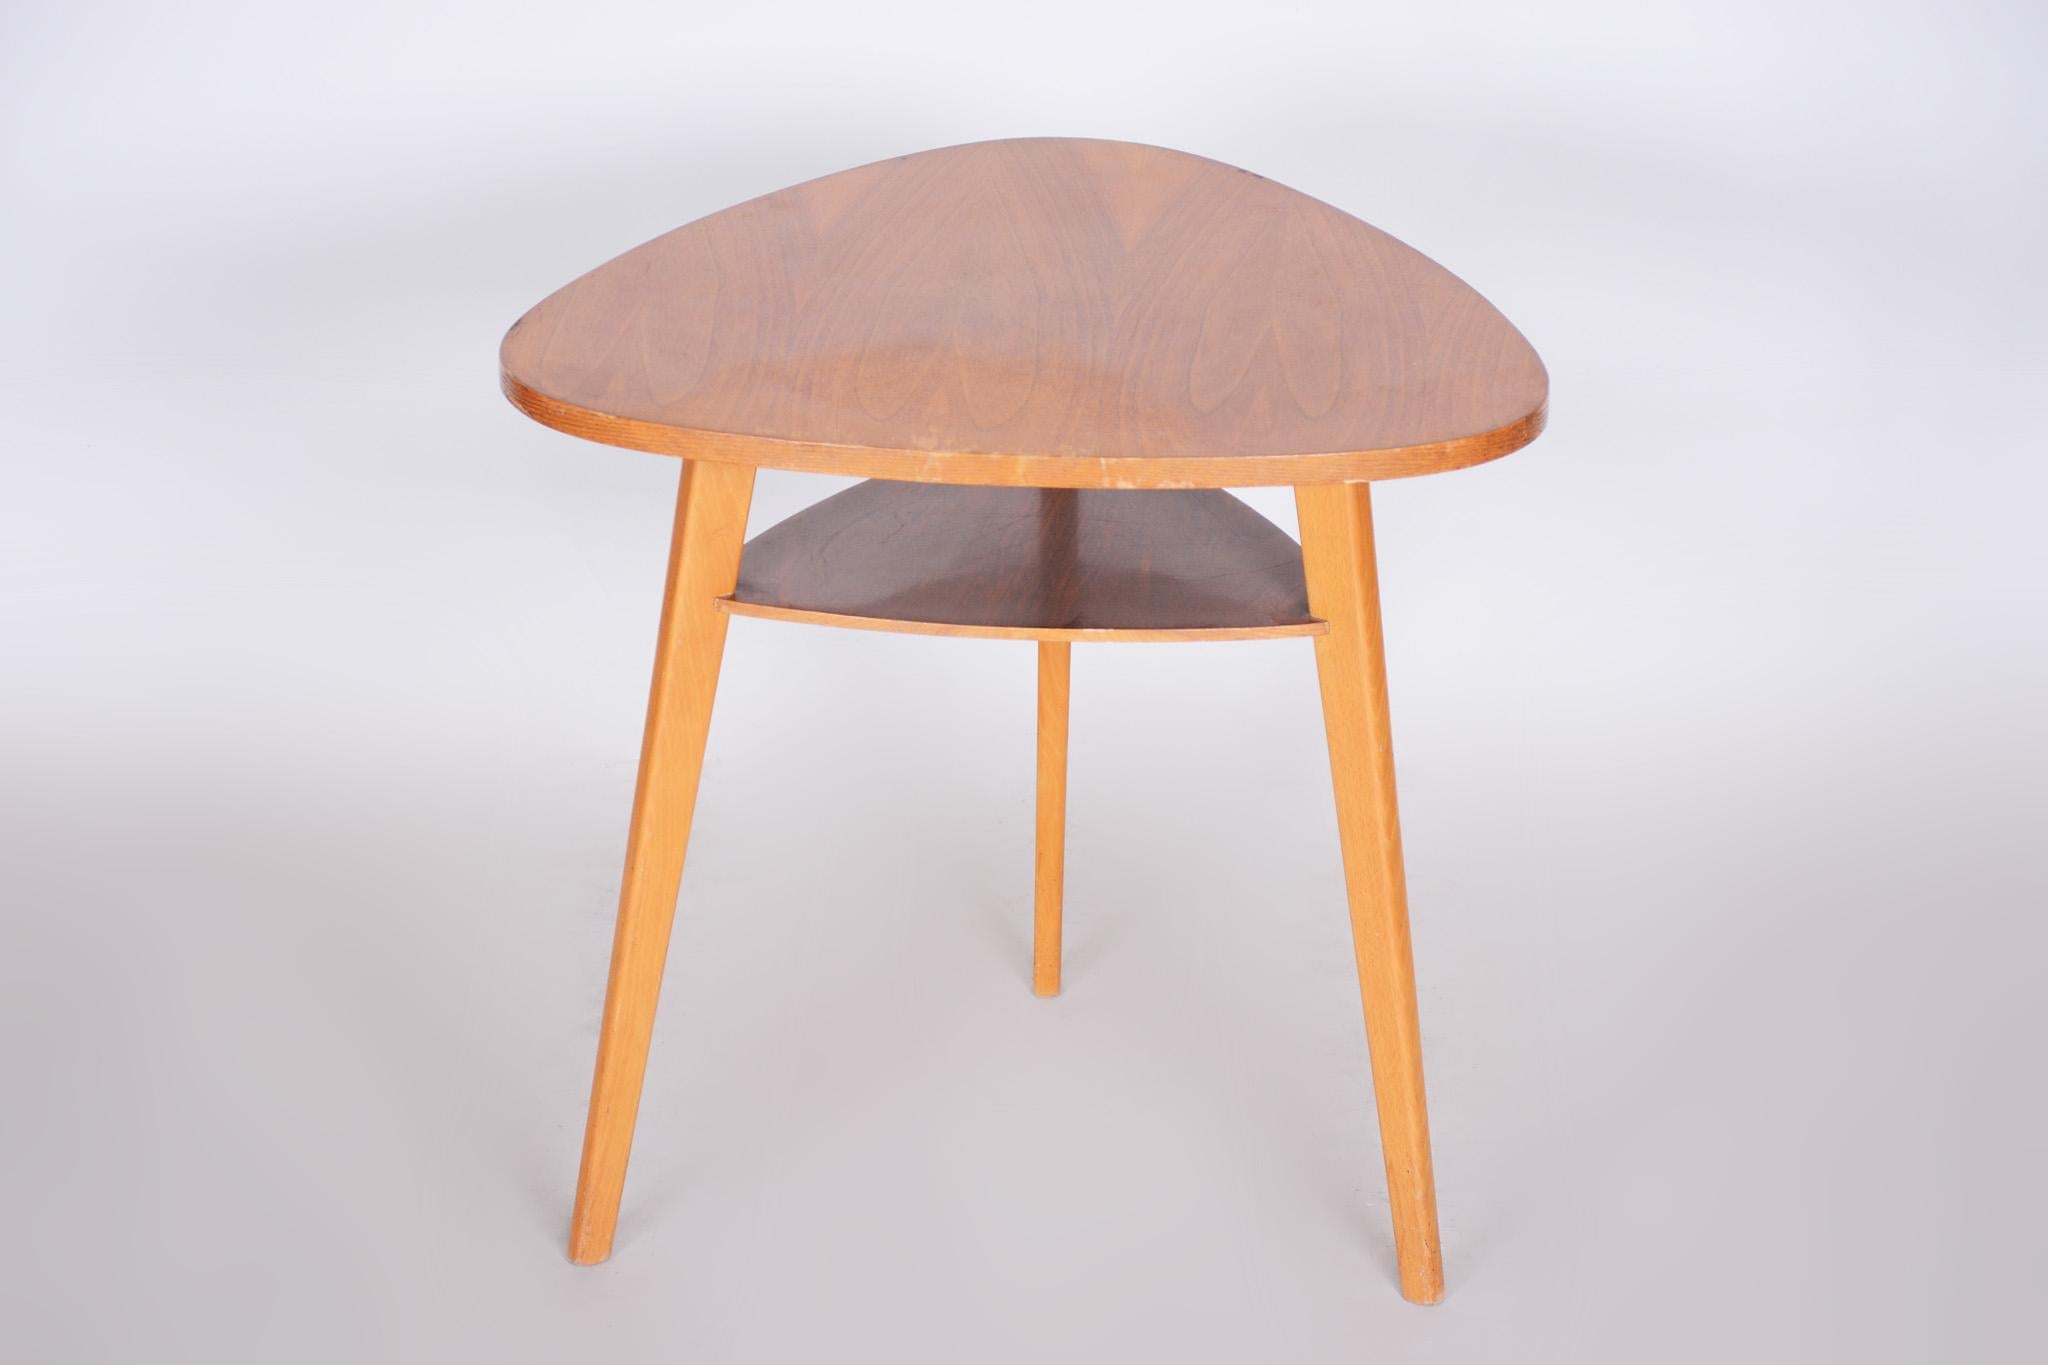 Mid Century Table, Made in Czechia, 1950s, Original Condition, Beech & Oak In Good Condition For Sale In Horomerice, CZ